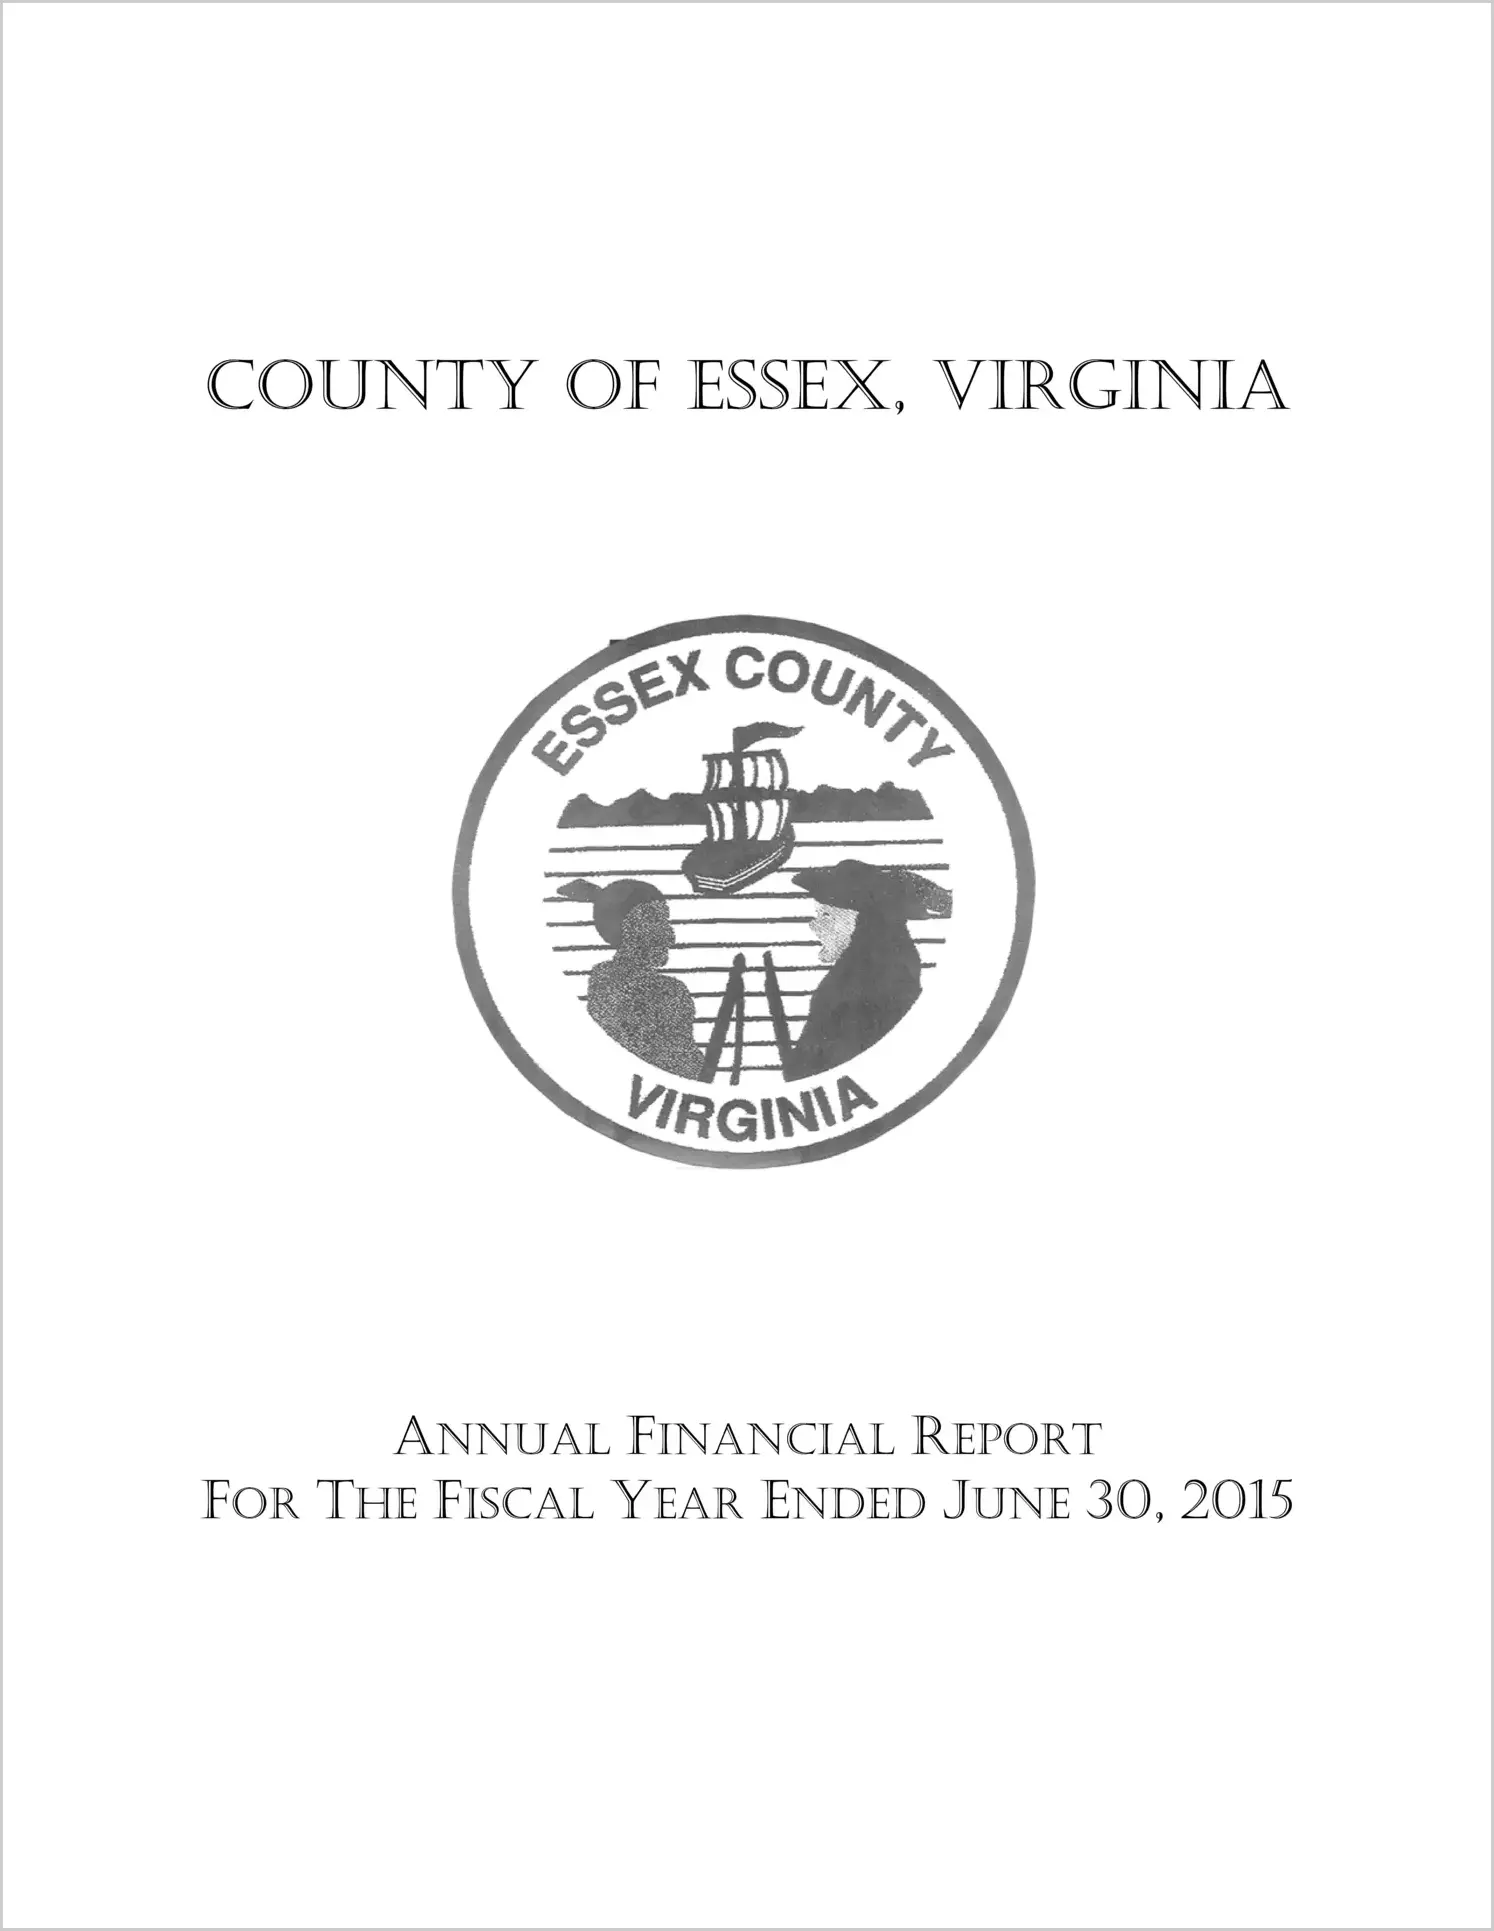 2015 Annual Financial Report for County of Essex